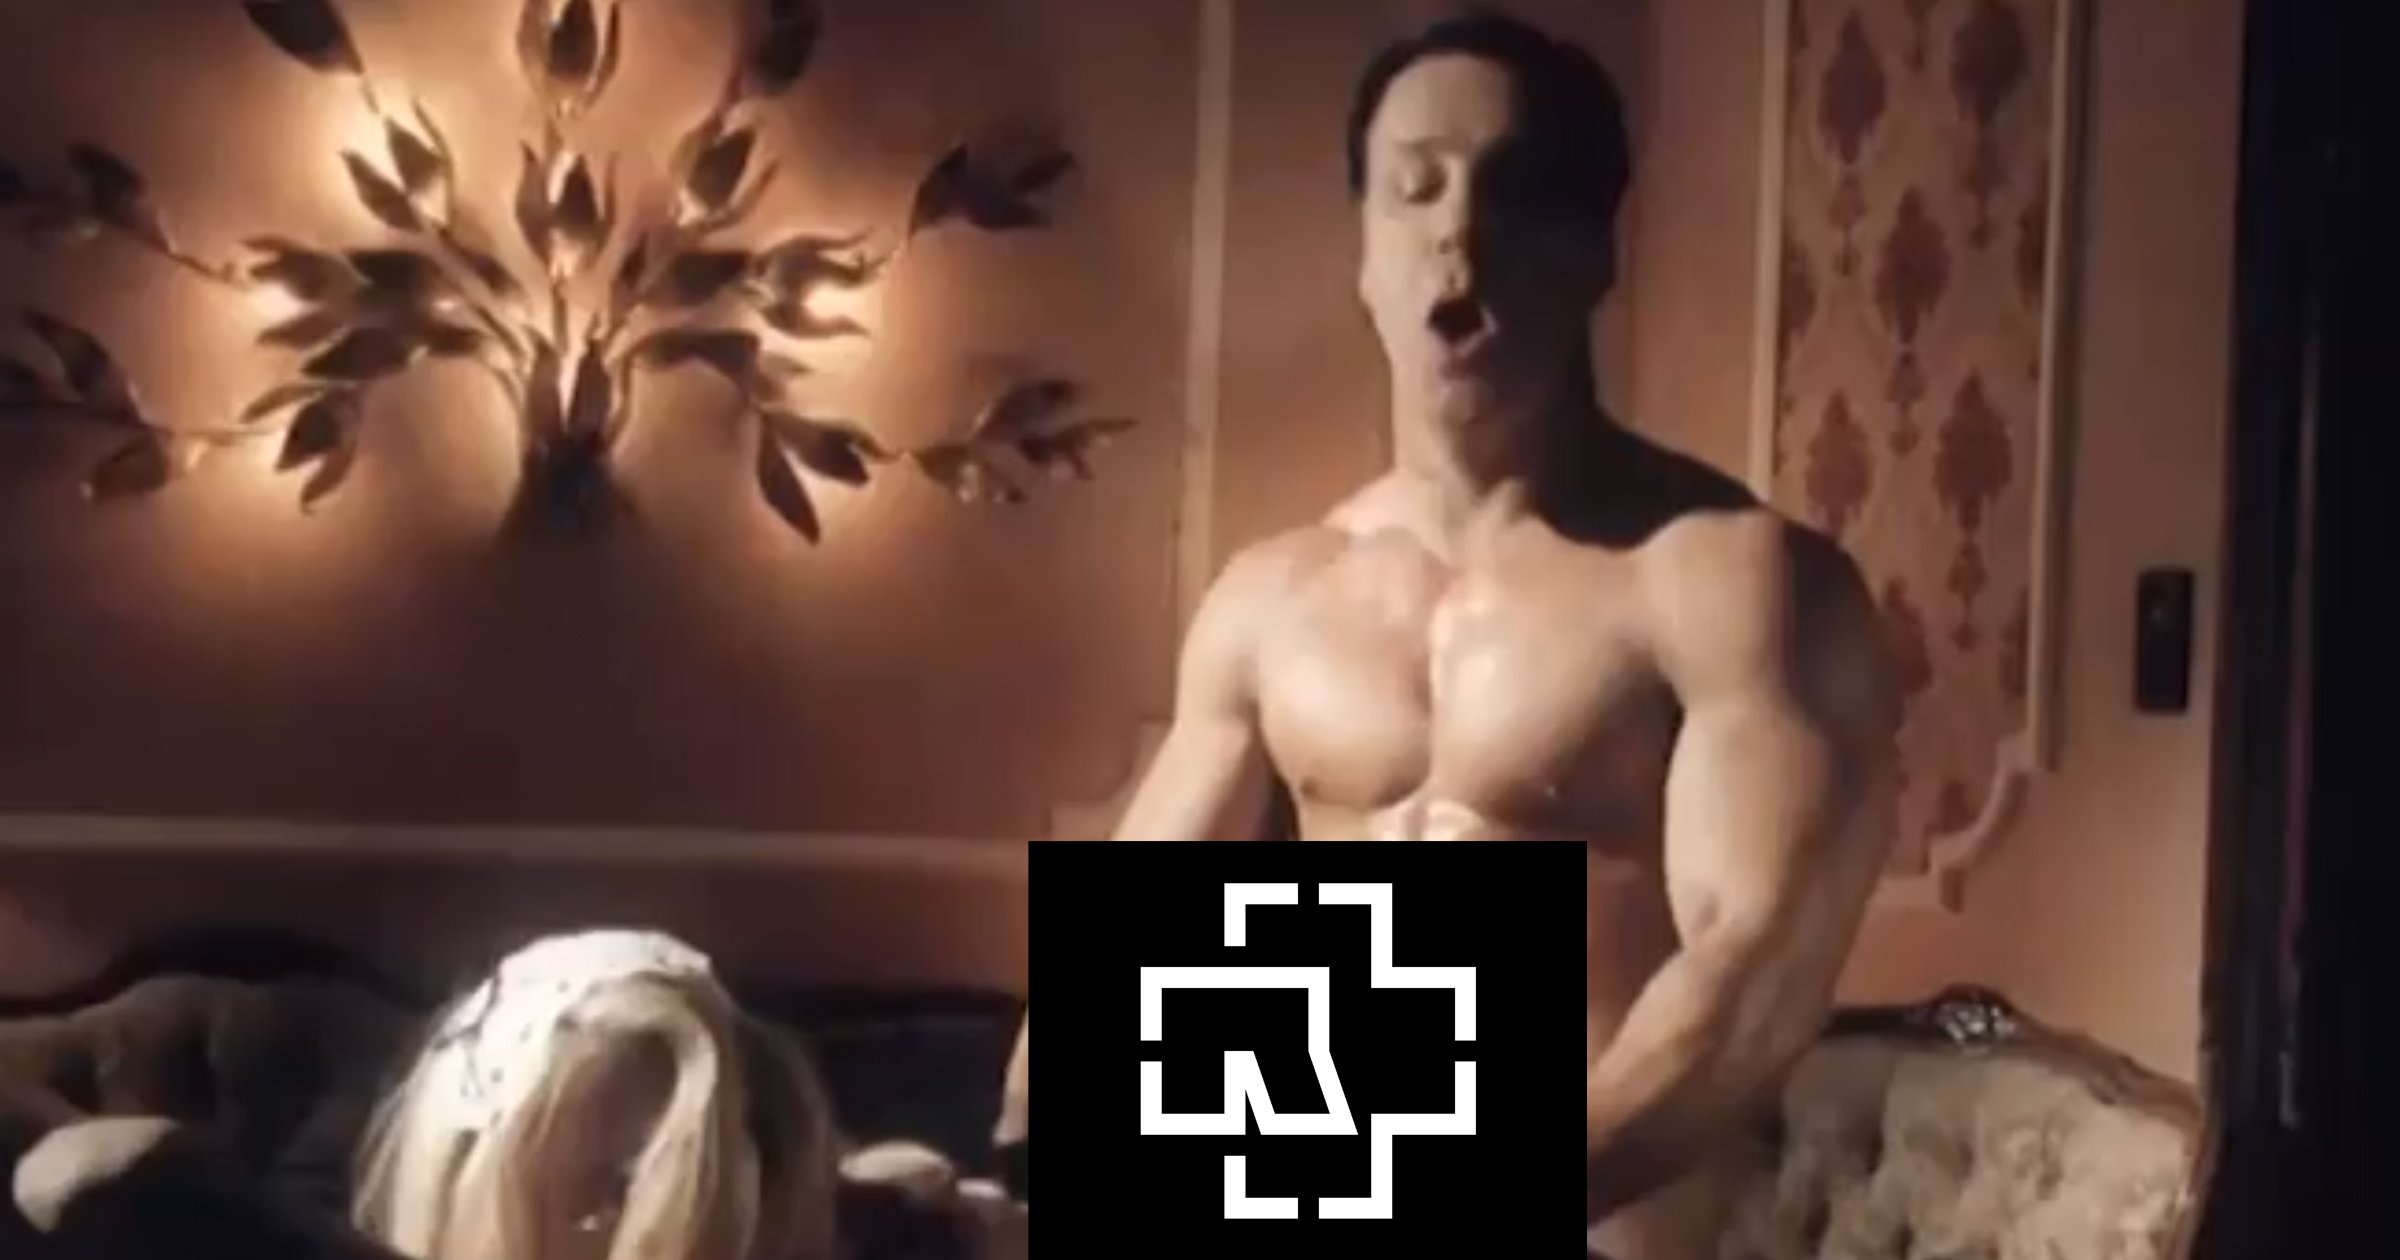 chuck kemper recommends rammstein pussy official video pic